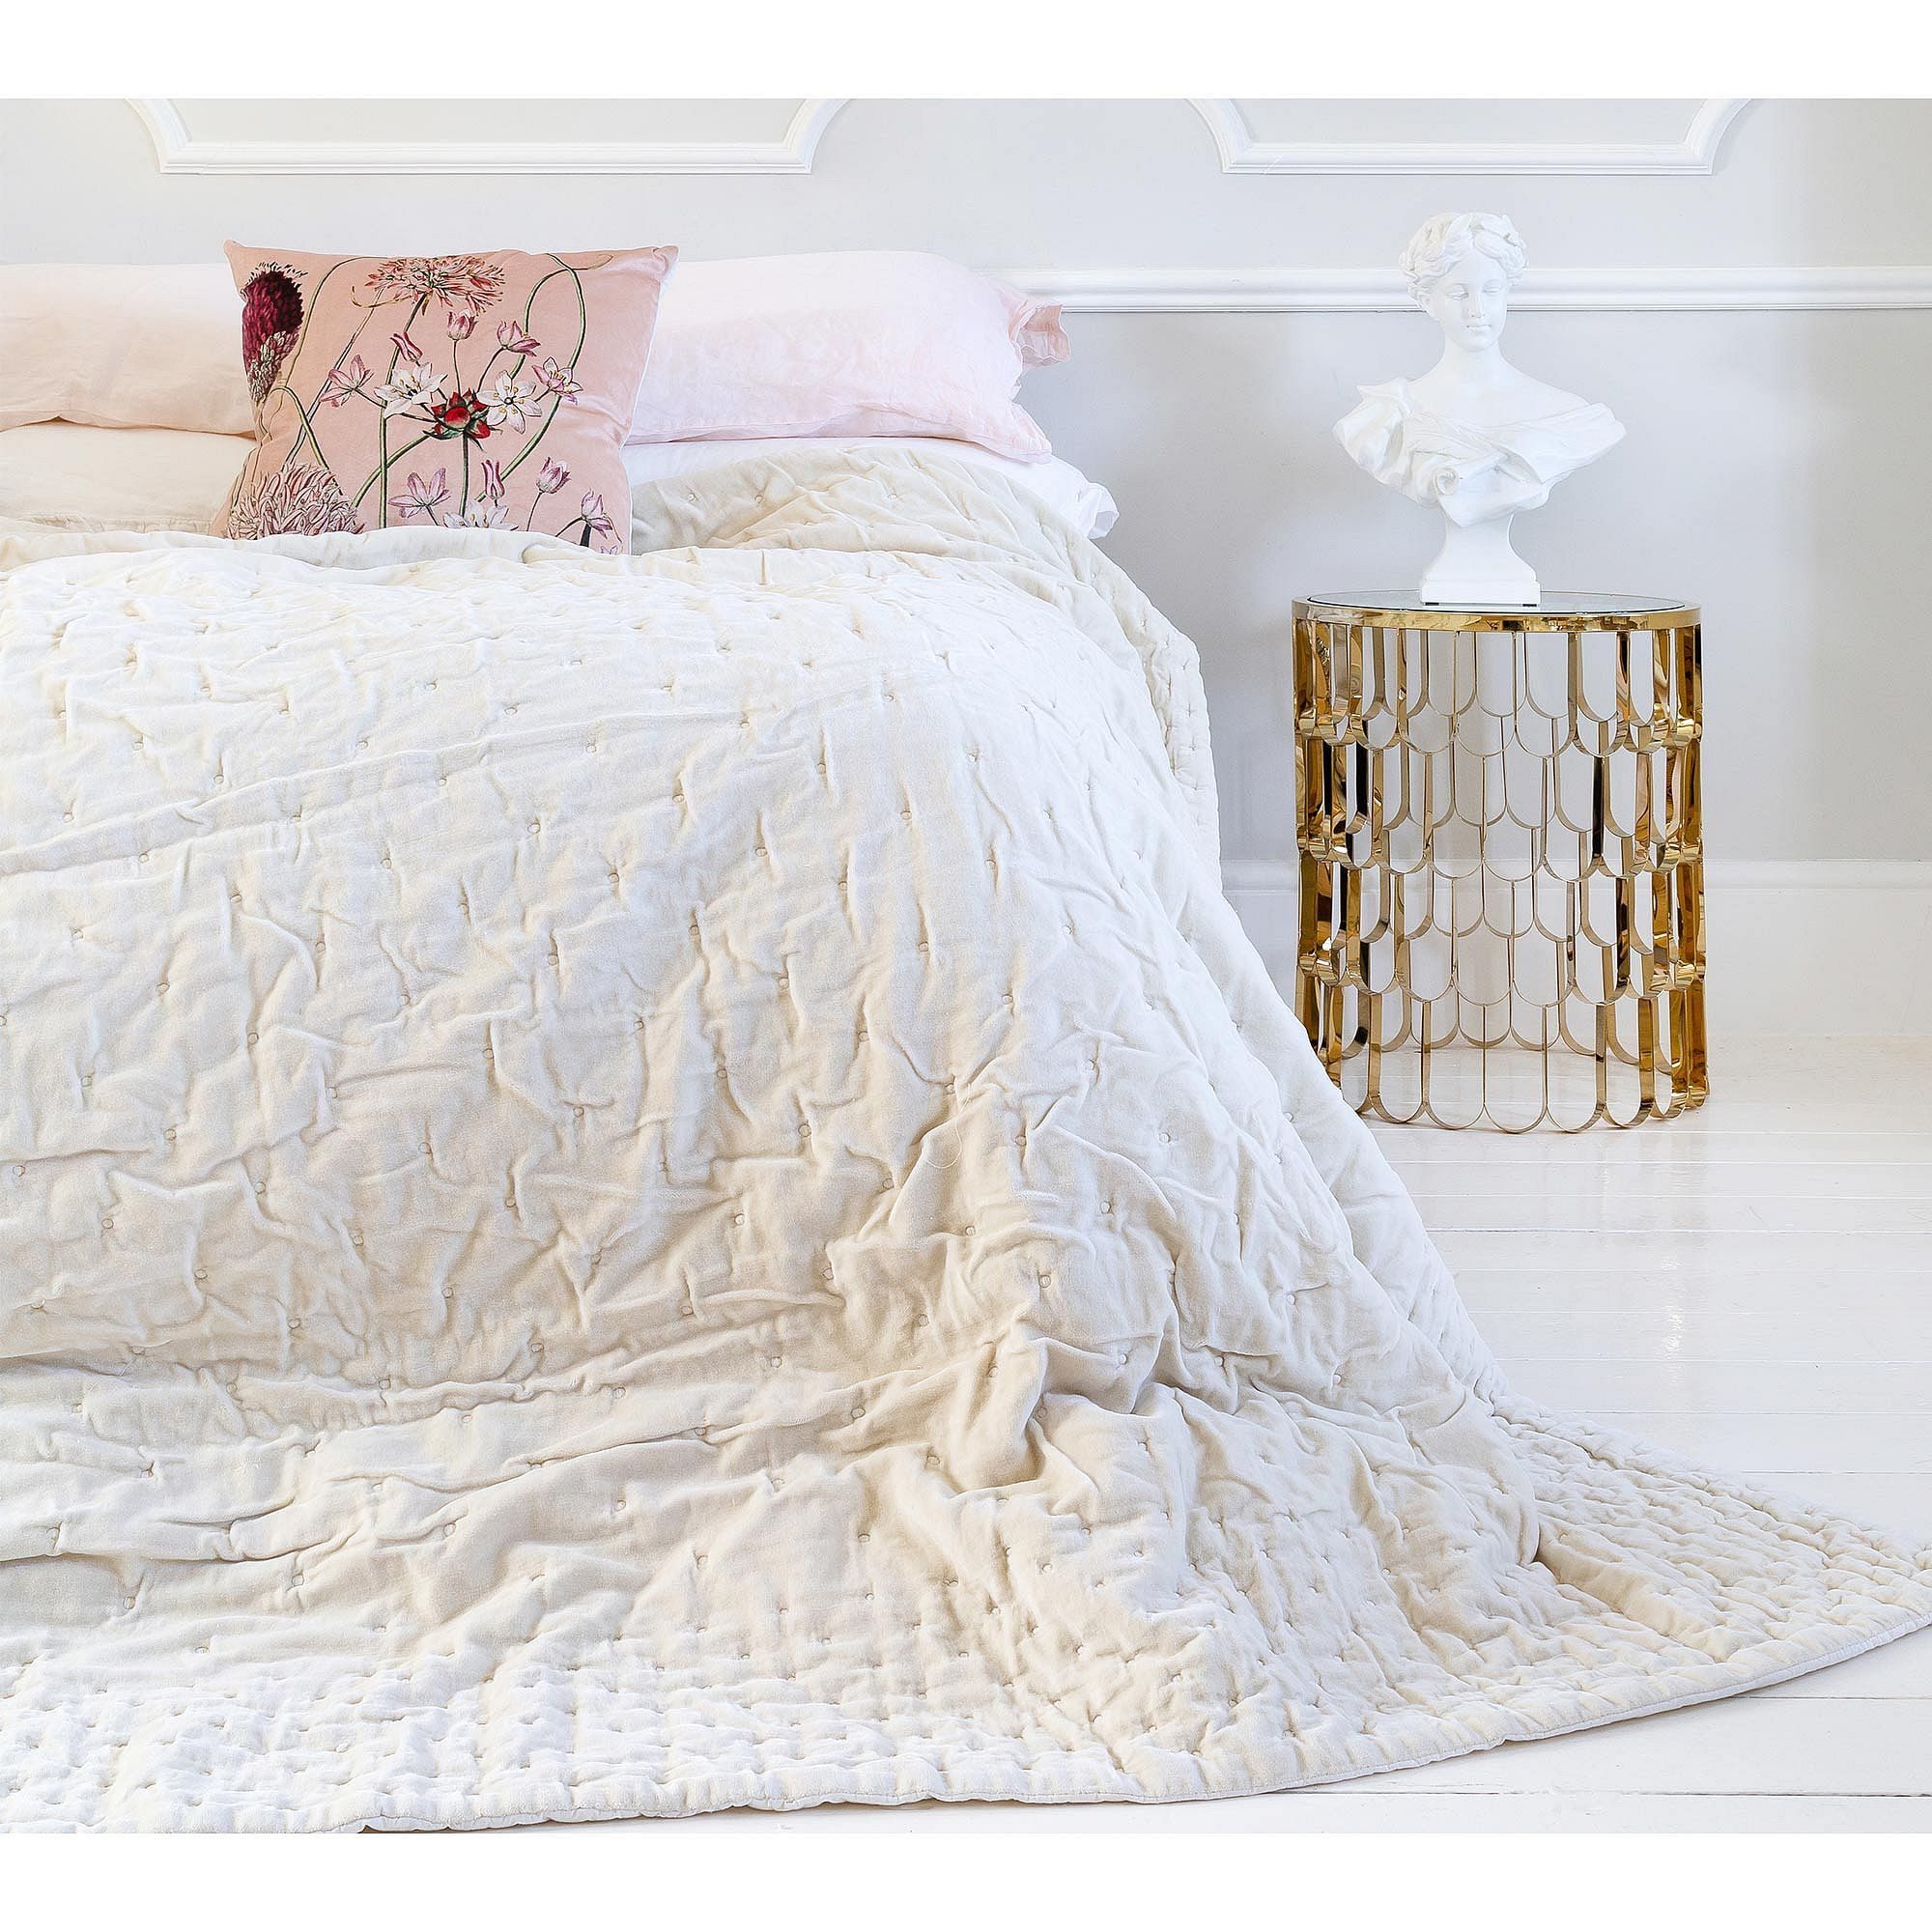 Plushious Ivory Cotton Velvet Quilted Bedspread (Grande) - image 1